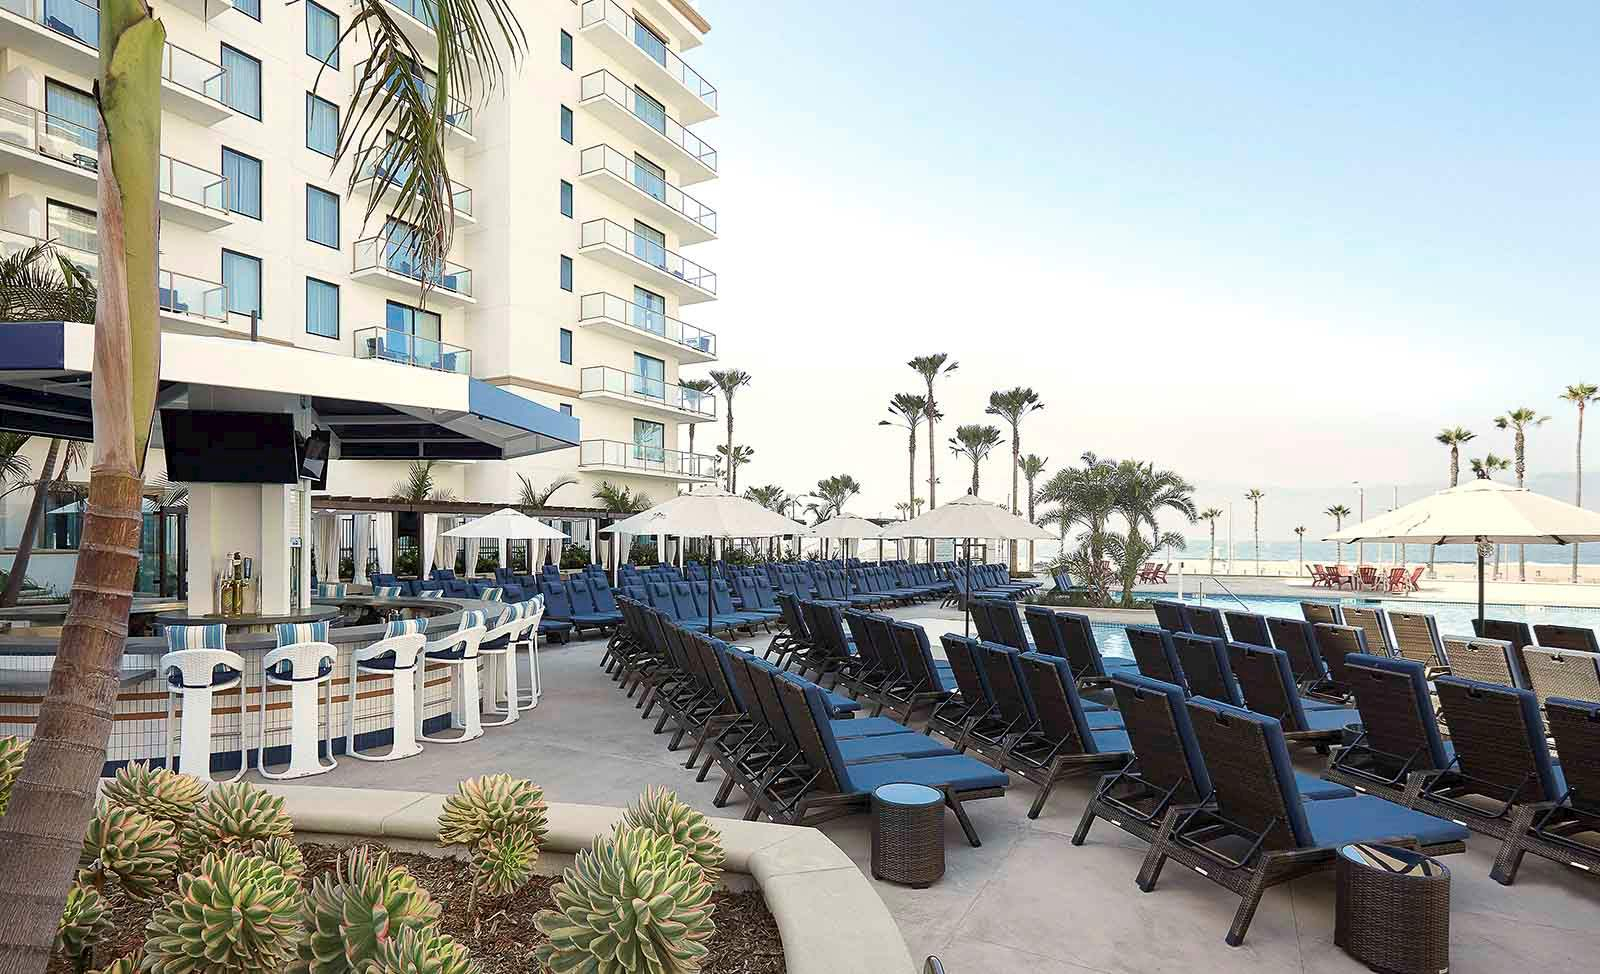 Luxury Hotel In Huntington Beach - The Waterfront Beach Resort - Map Of Hilton Hotels In California